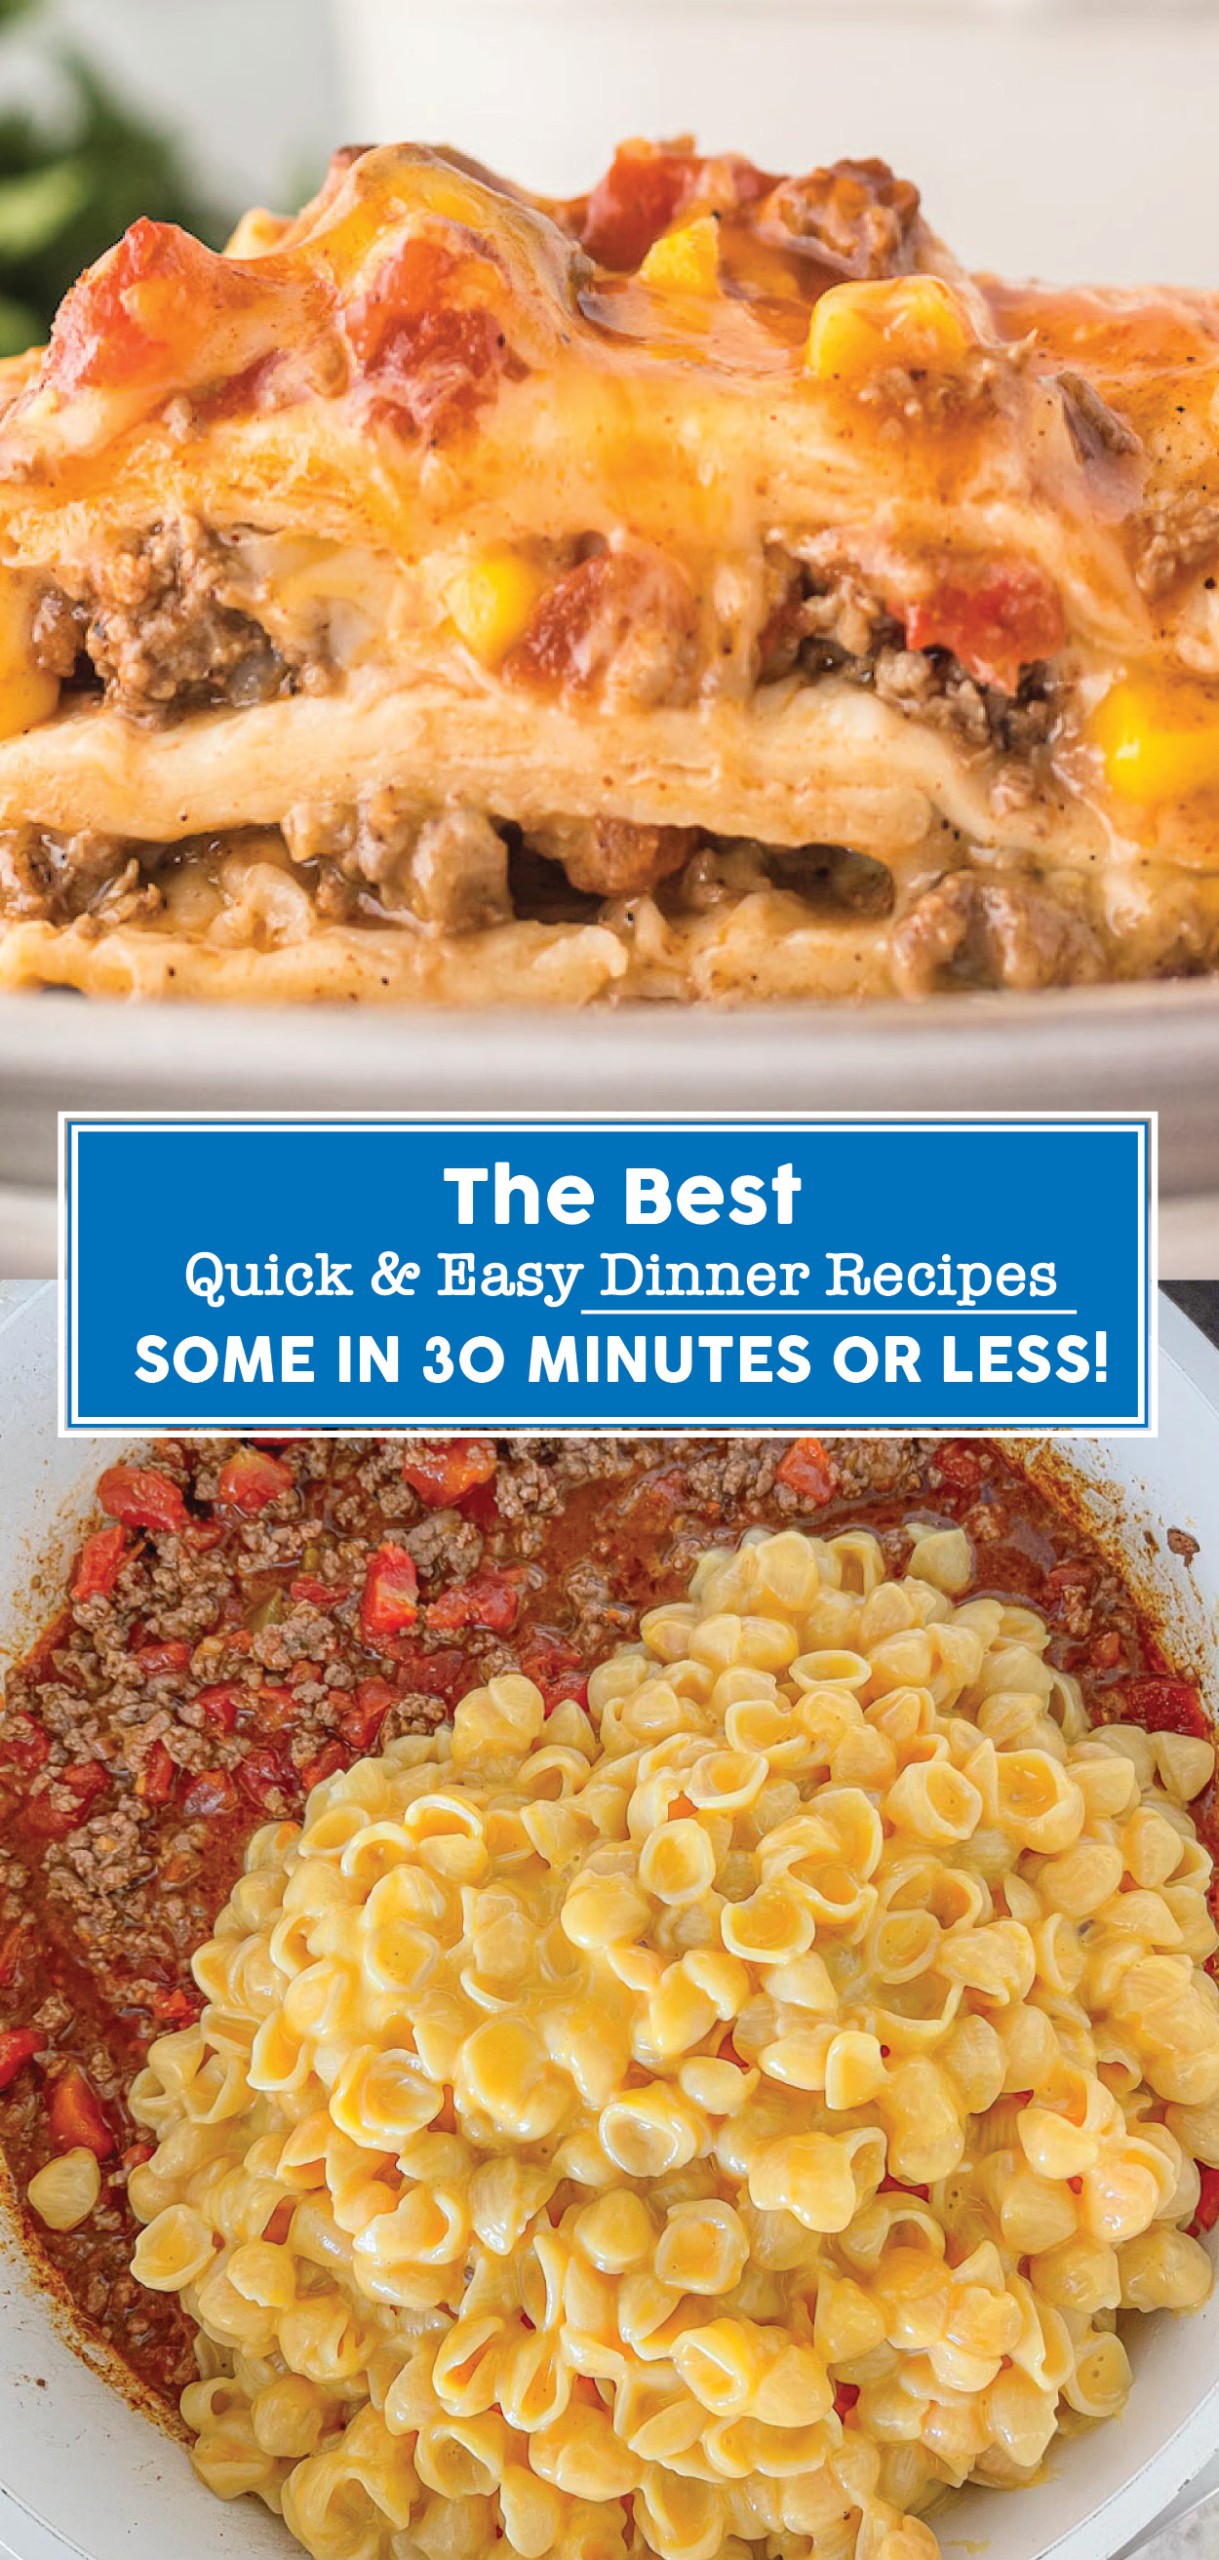 The Best Quick, Easy Dinner Recipes You Can Make... Some in 30 Minutes or Less! These meals are perfect for busy weeknights.